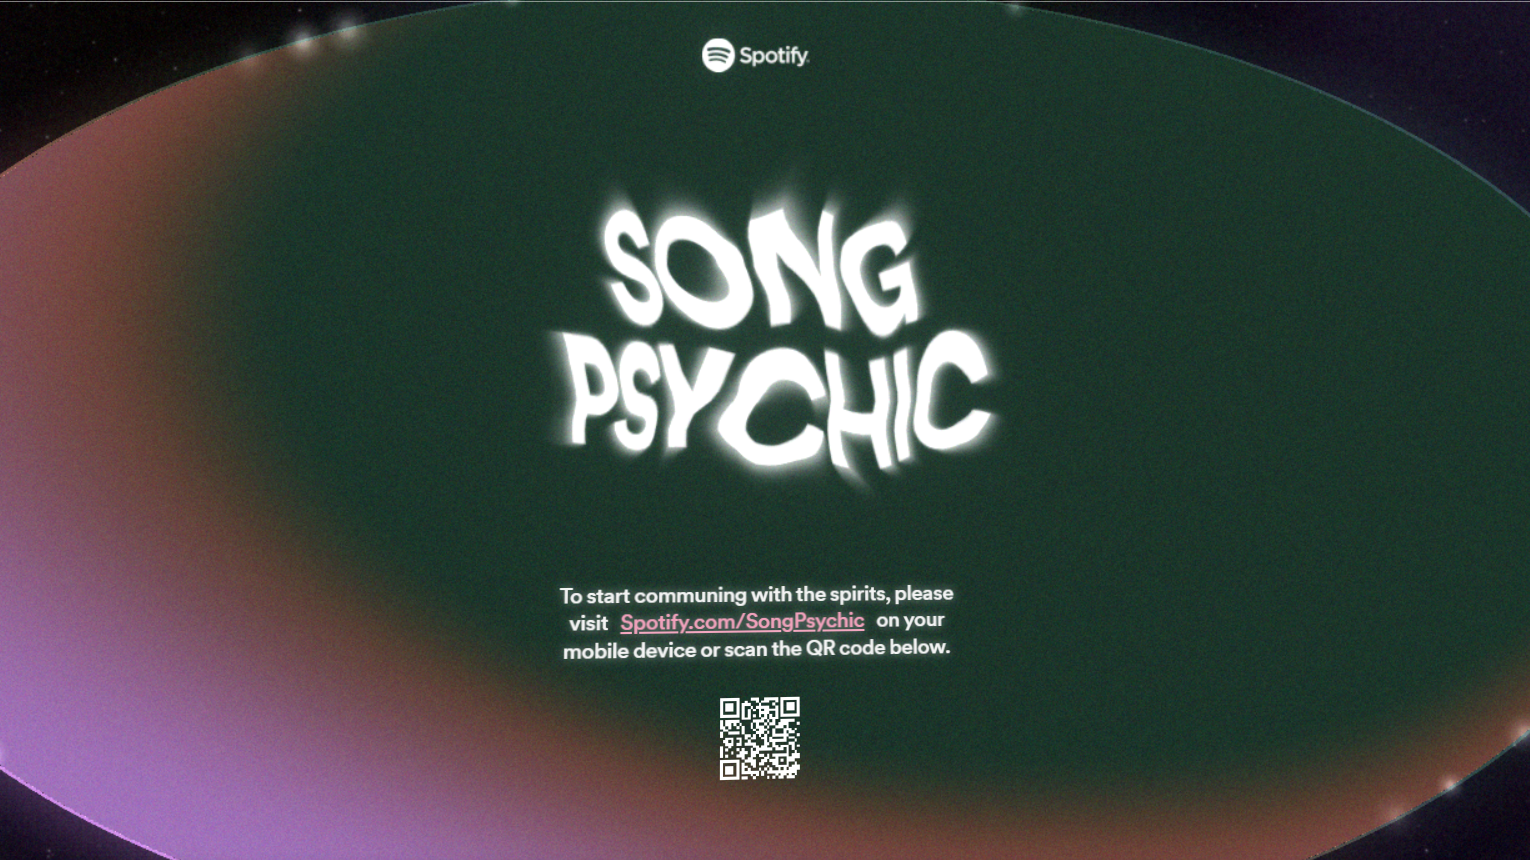 'Spotify Song Psychic' gives answers in the form of music!